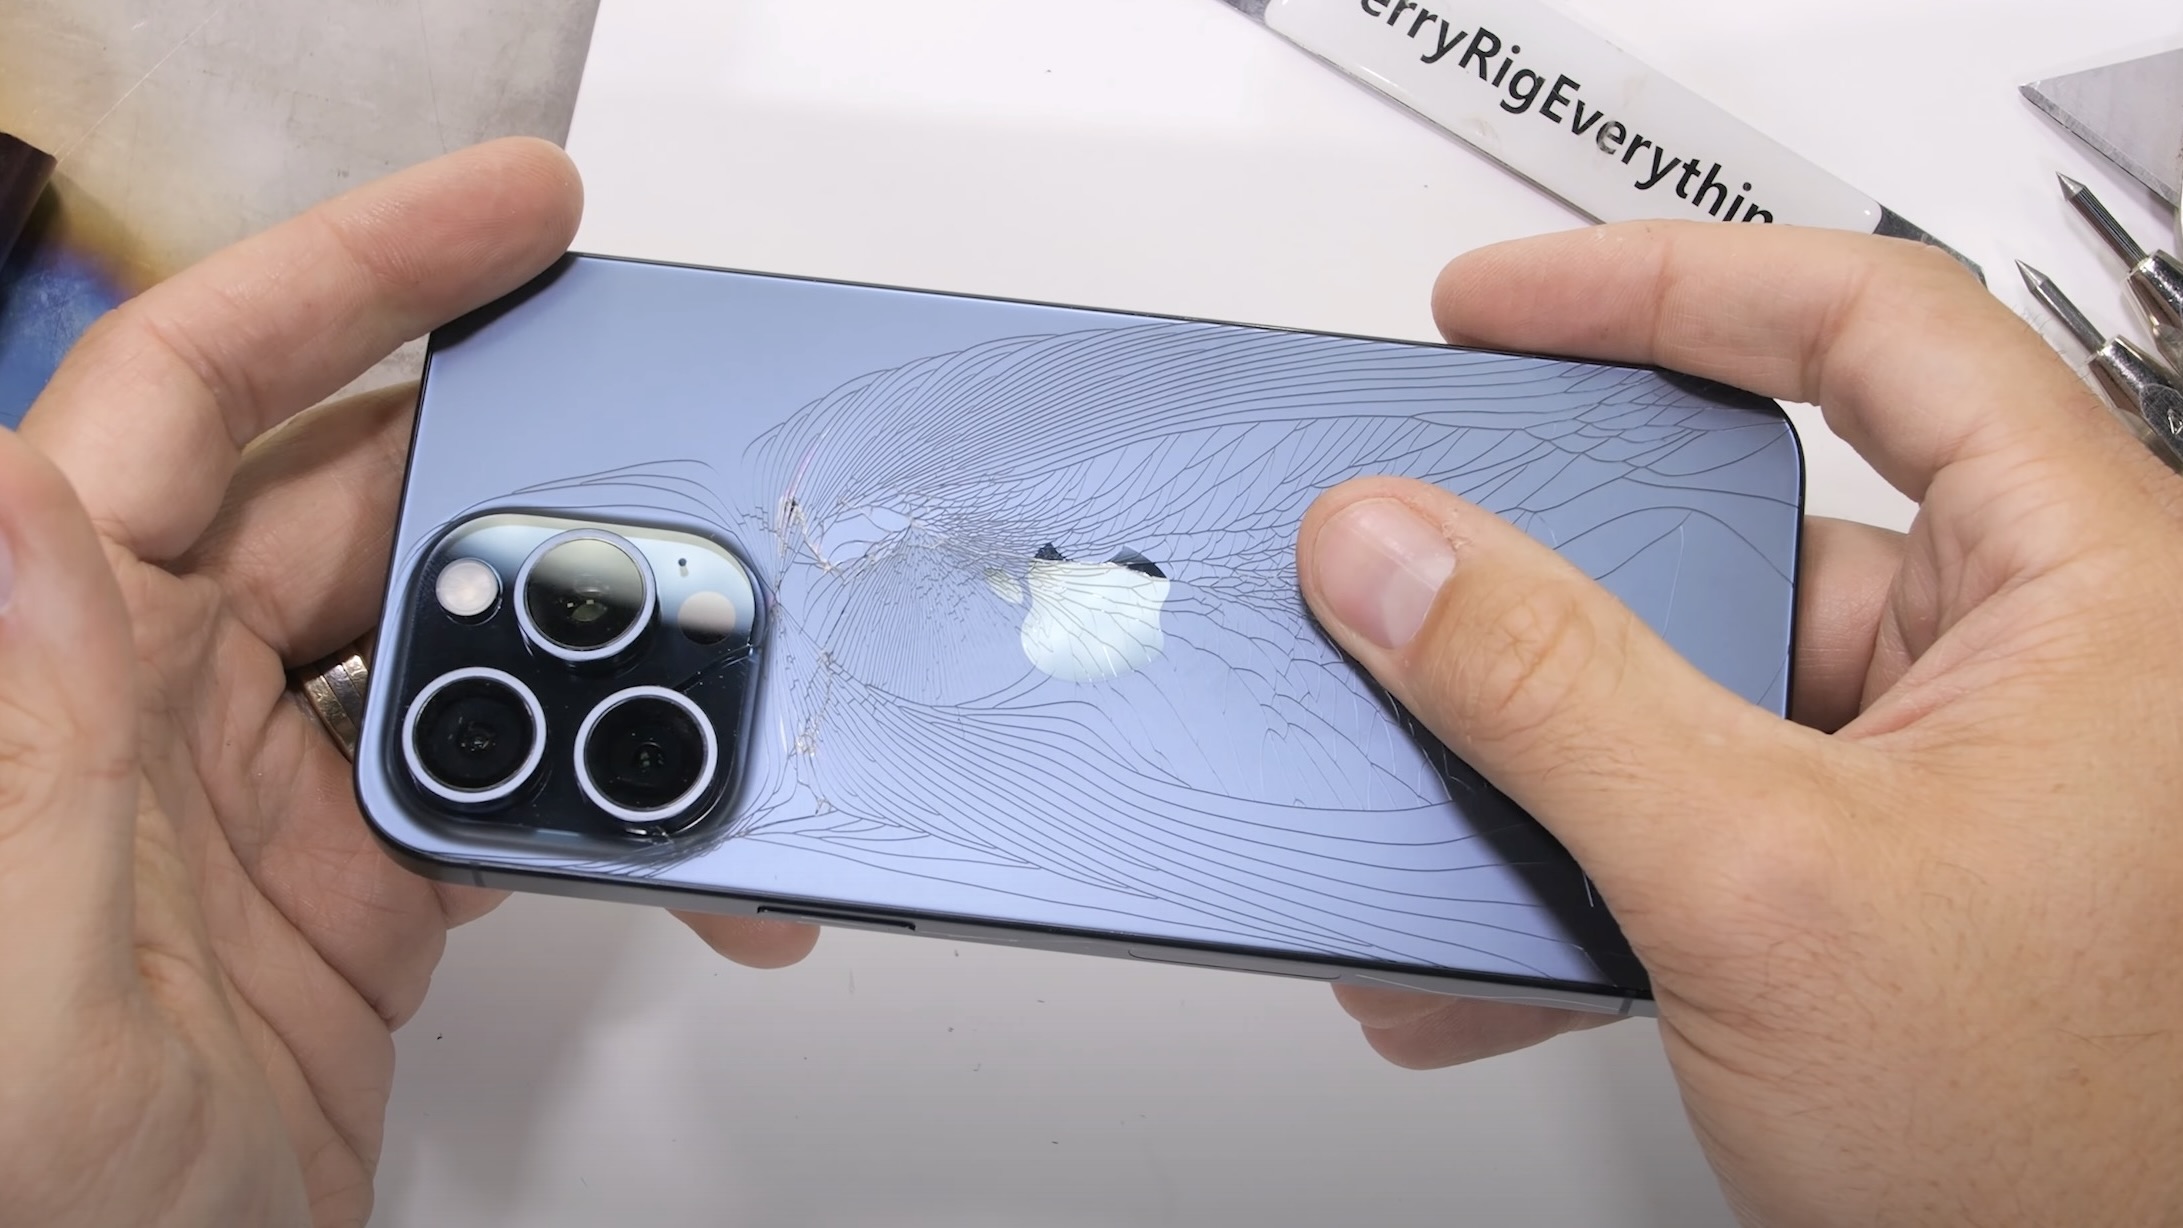 iPhone 15 Pro Max back glass cracks within seconds in new durability test [Video]